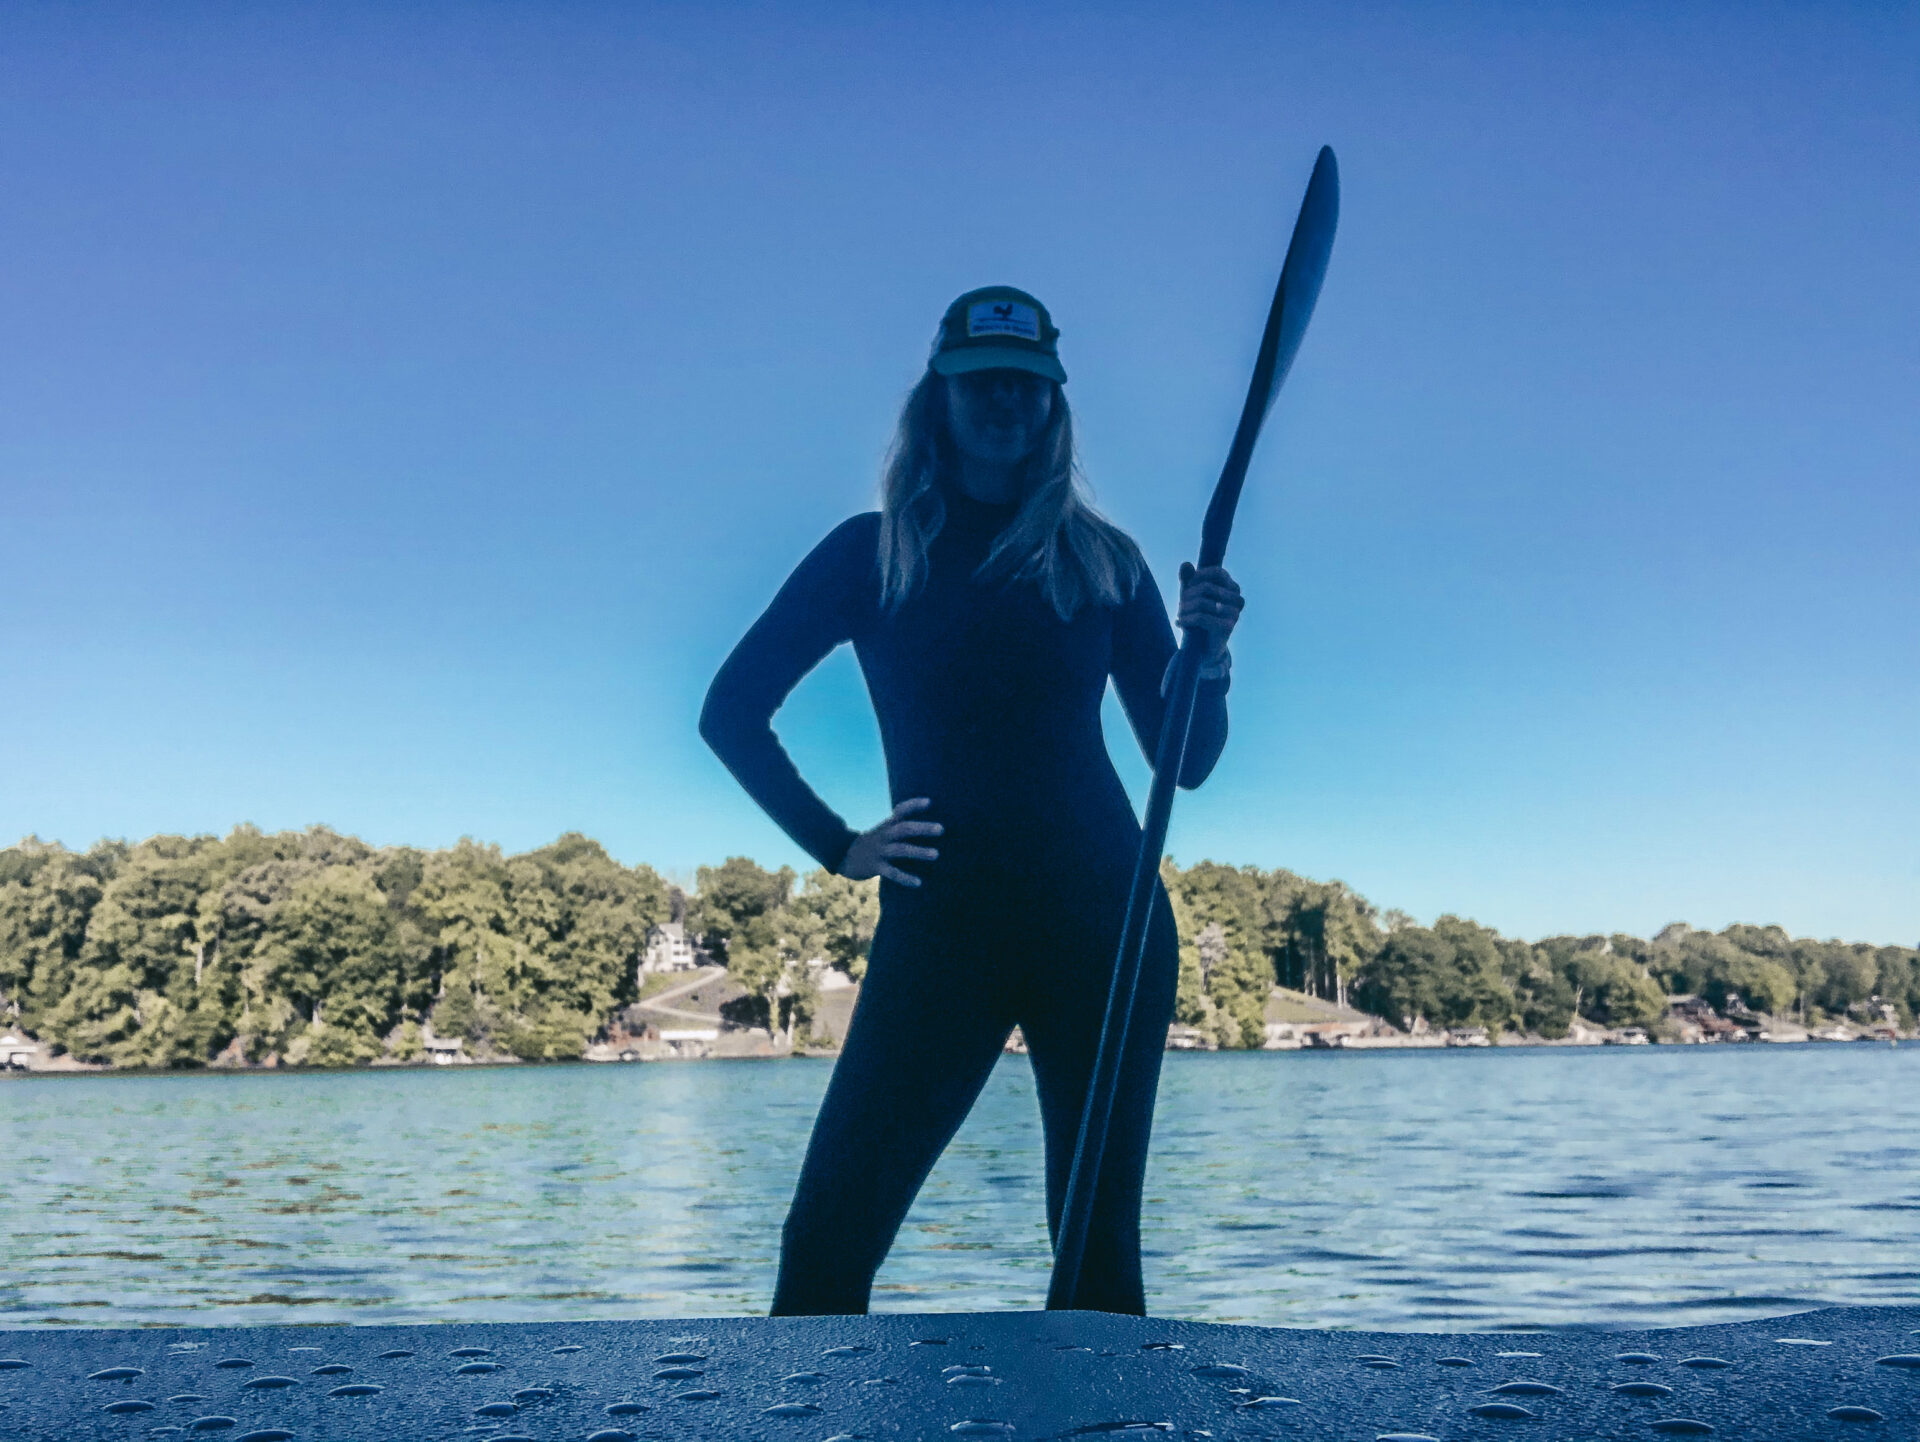 How to Care for, Restore and Repair your Stand Up Paddleboard